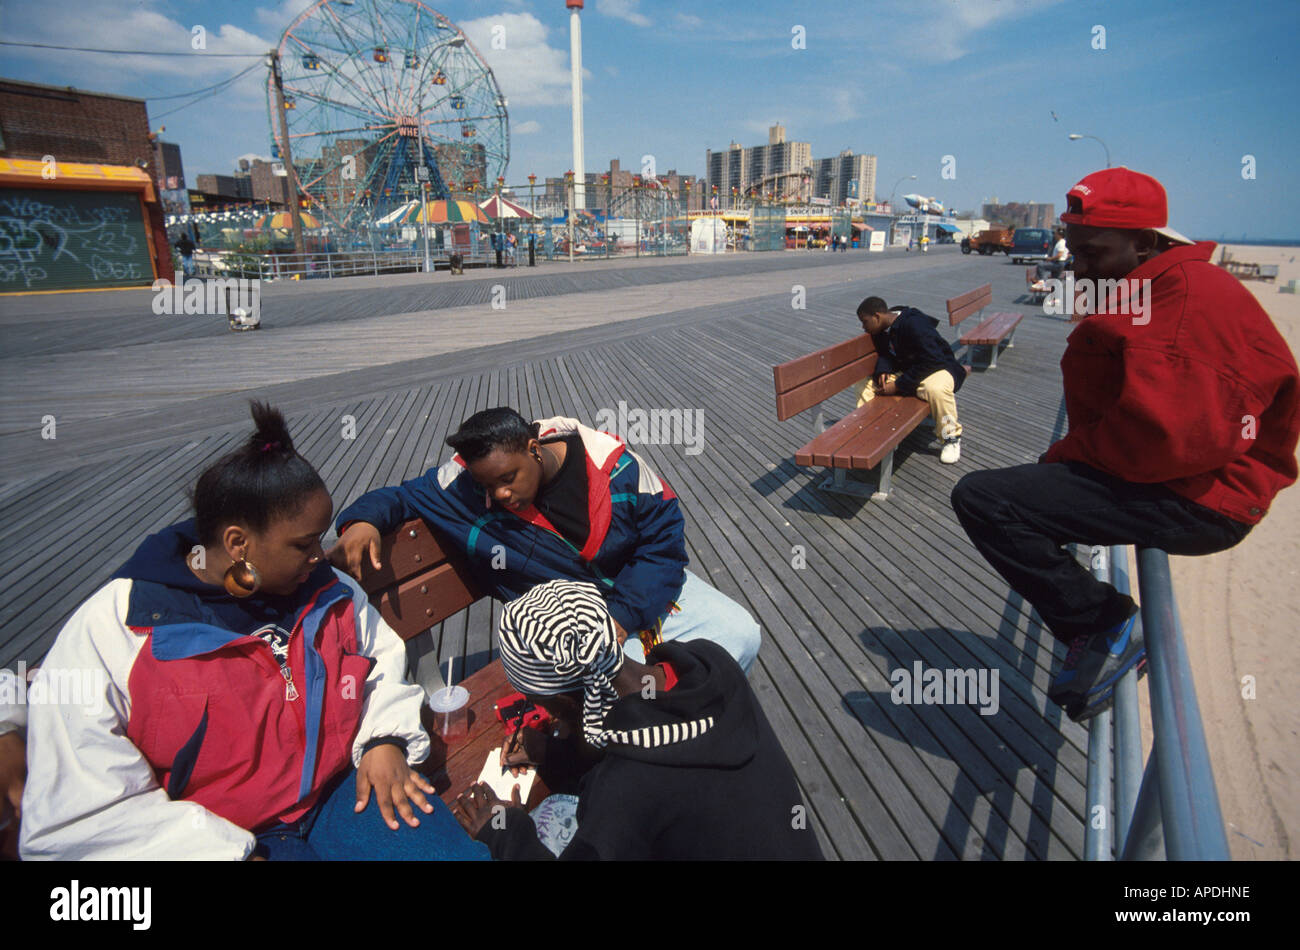 Youths at an amusement park on Coney Island, New York City, New York, USA Stock Photo